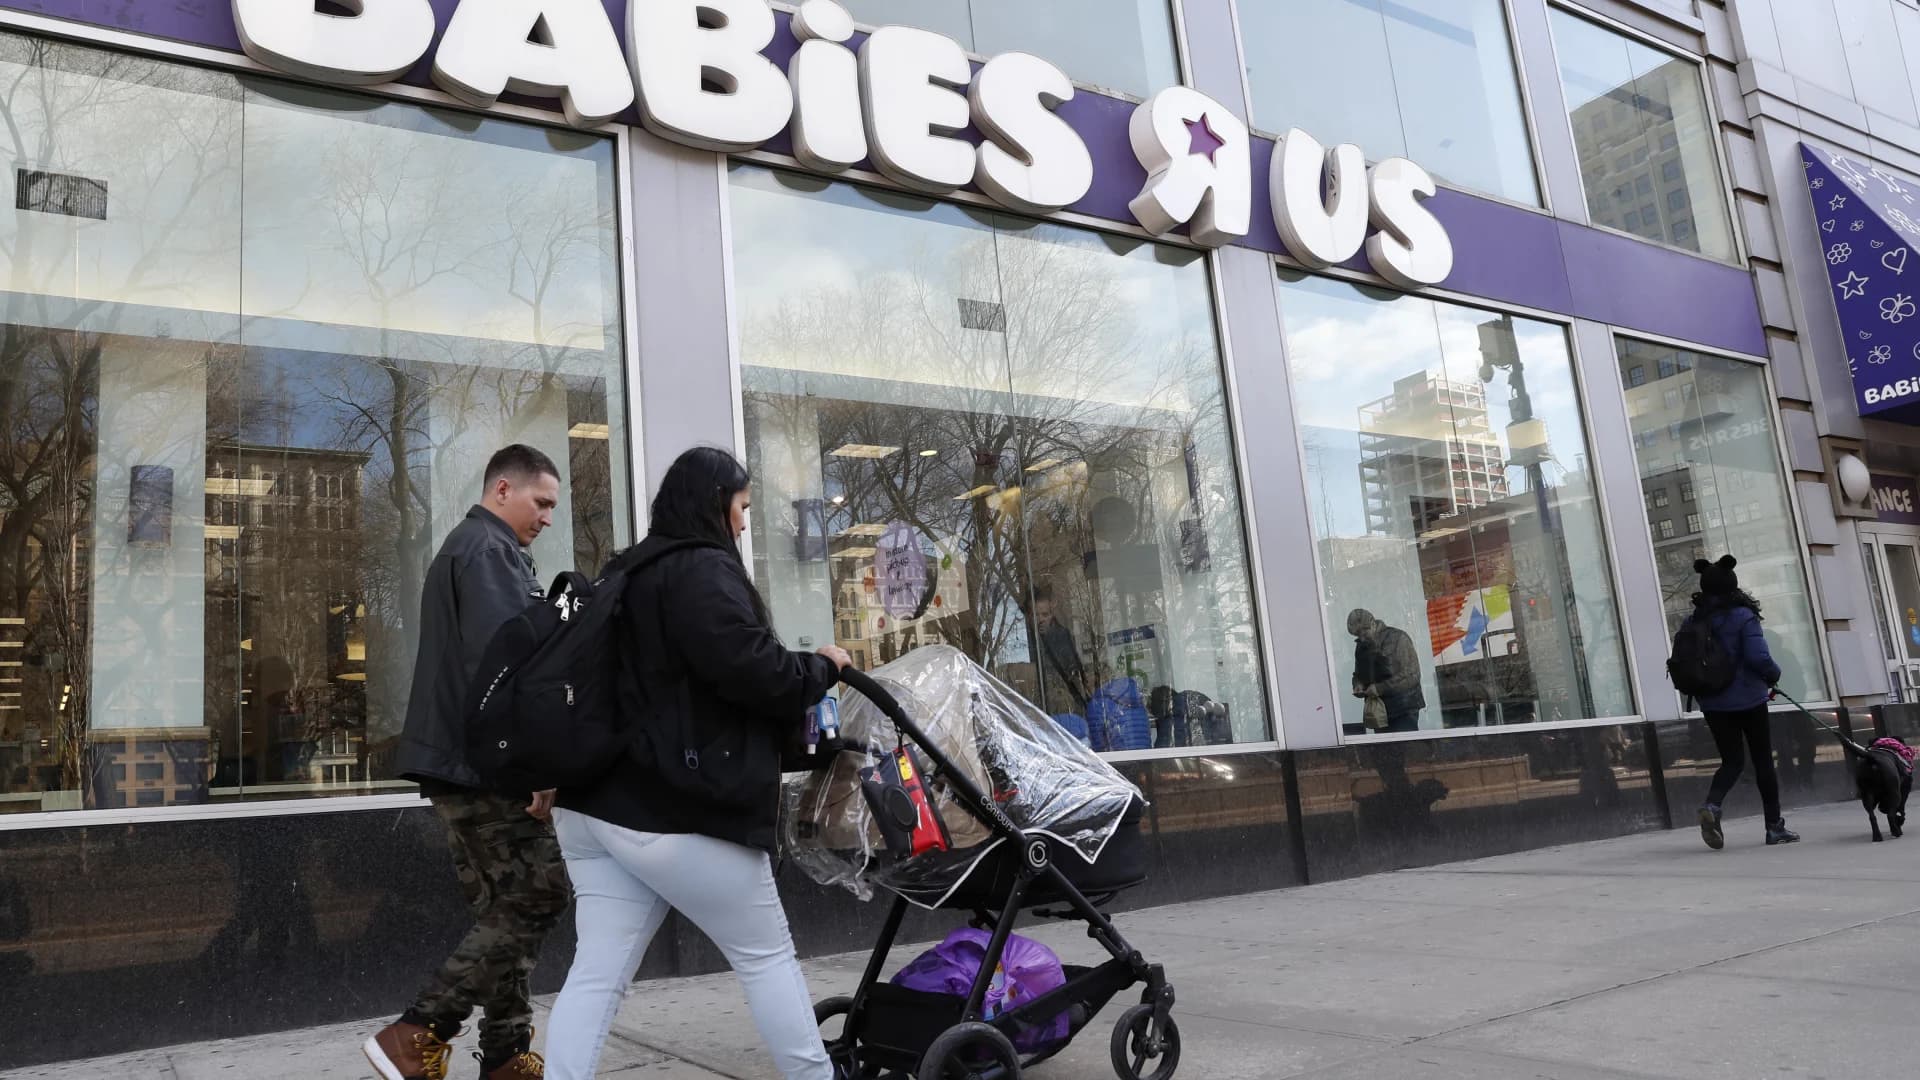 3 Kohl's in Connecticut to open Babies'R'Us locations. See list of stores